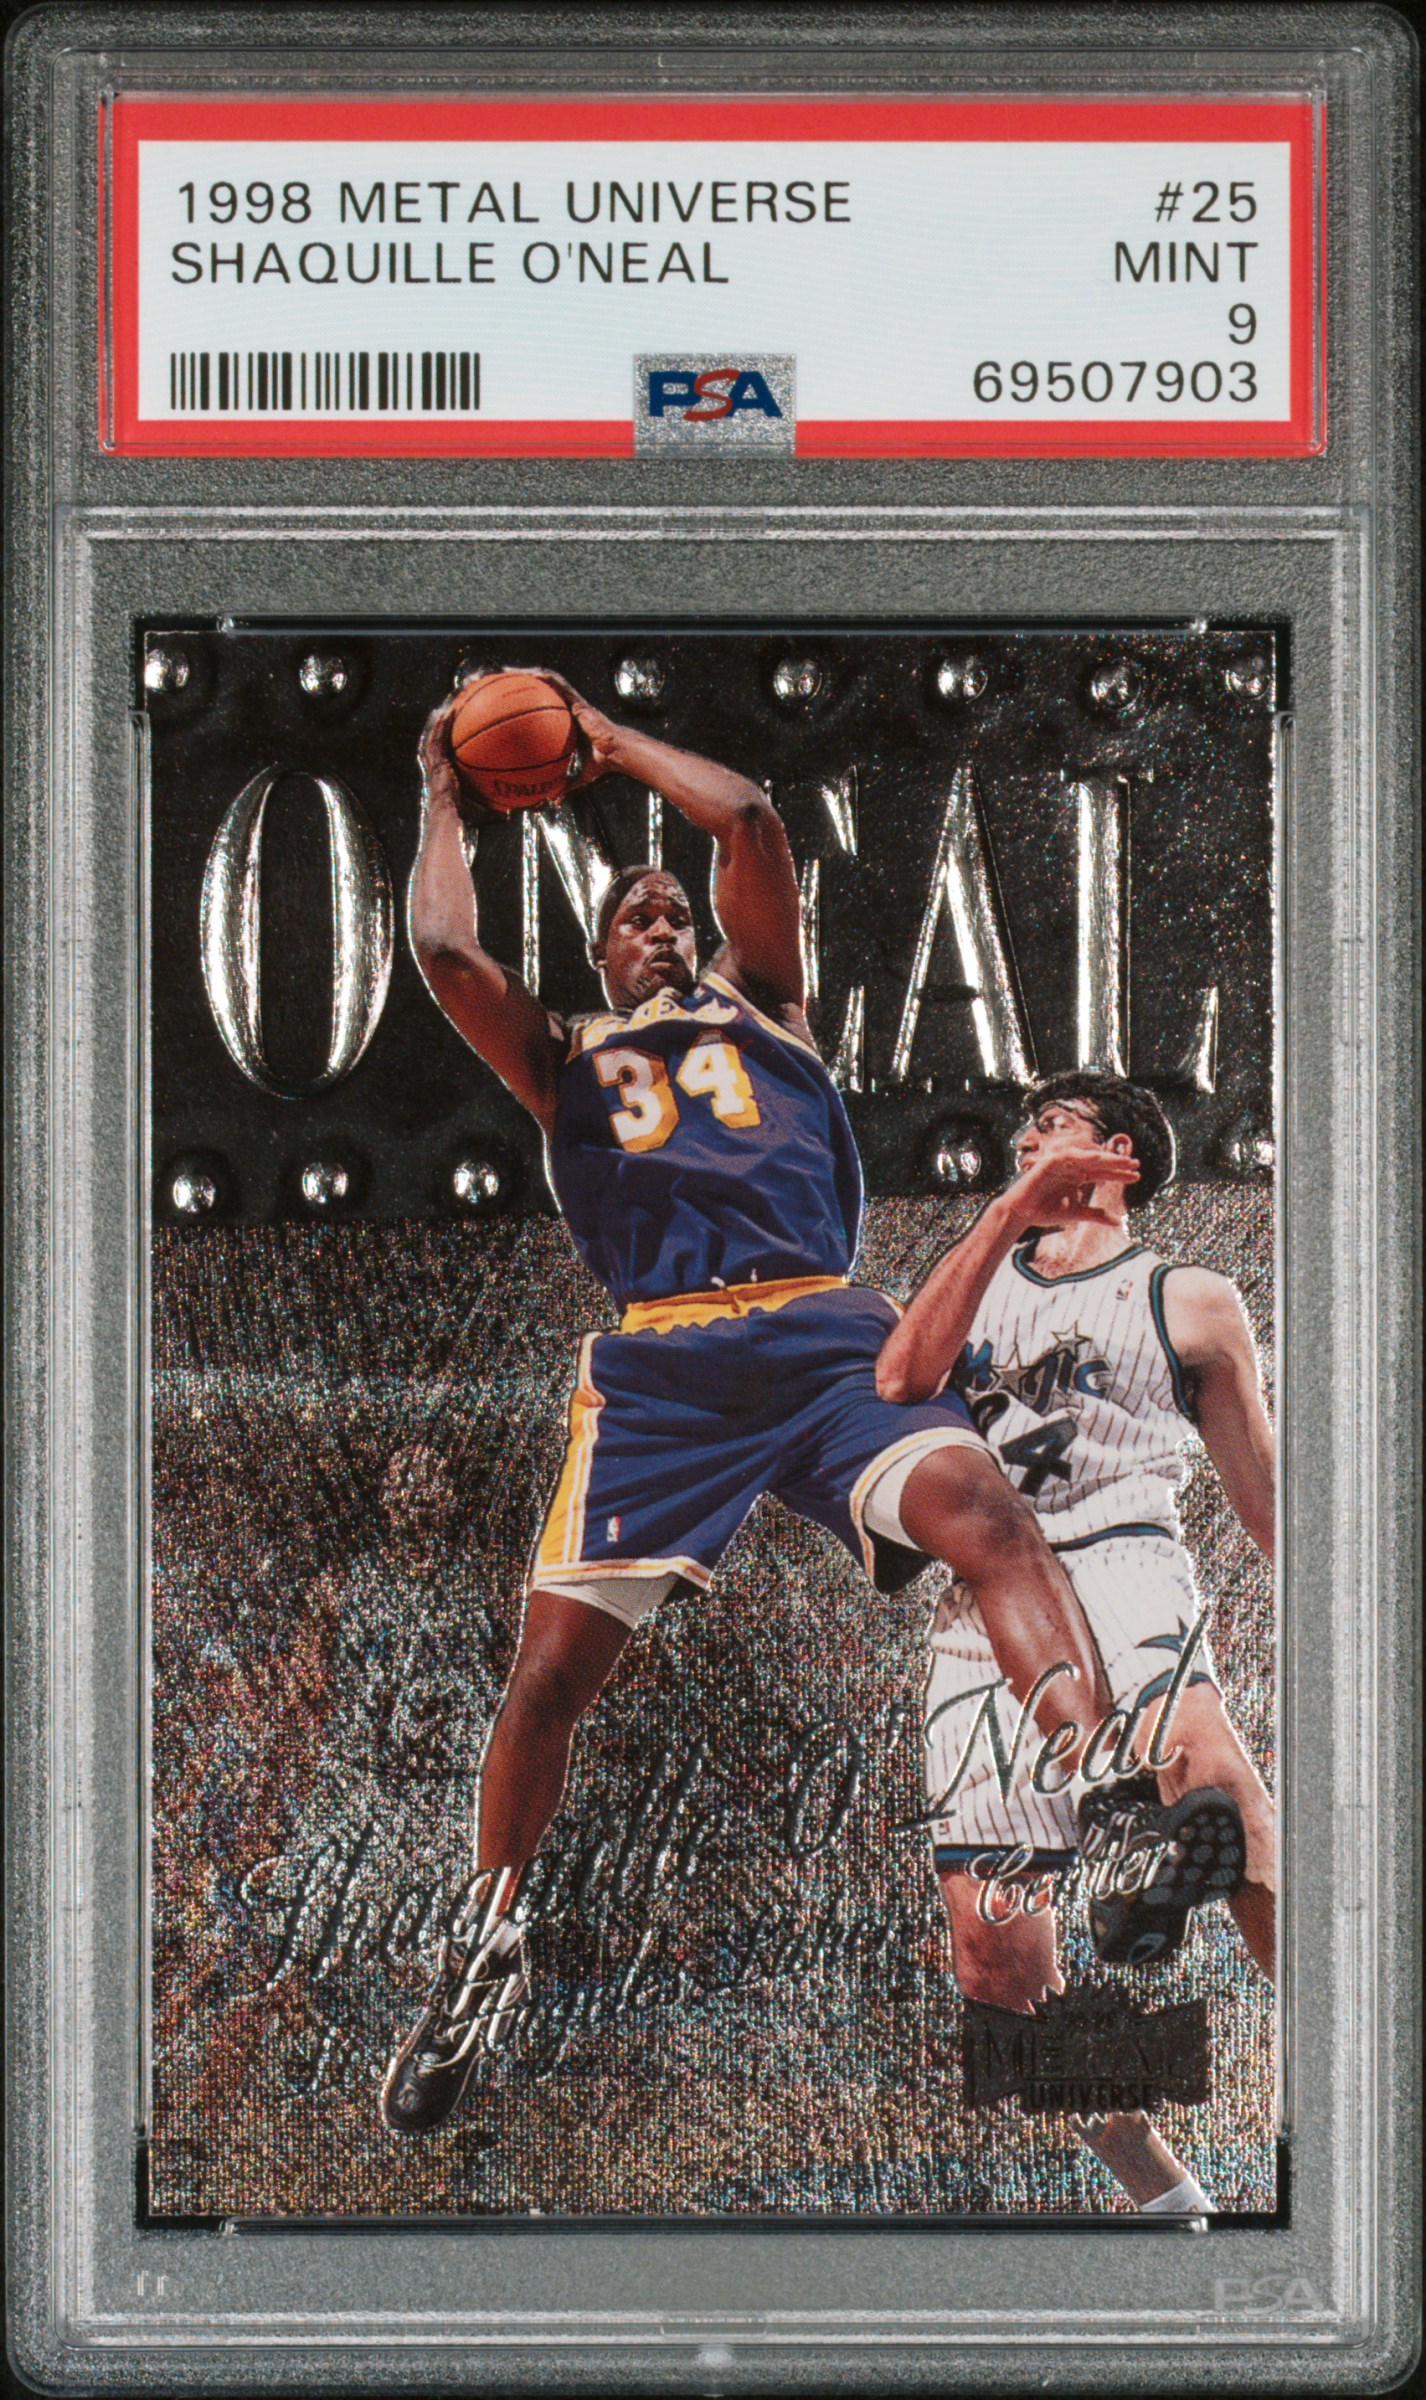 1998-99 Metal Universe #25 Shaquille O'Neal – PSA MINT 9